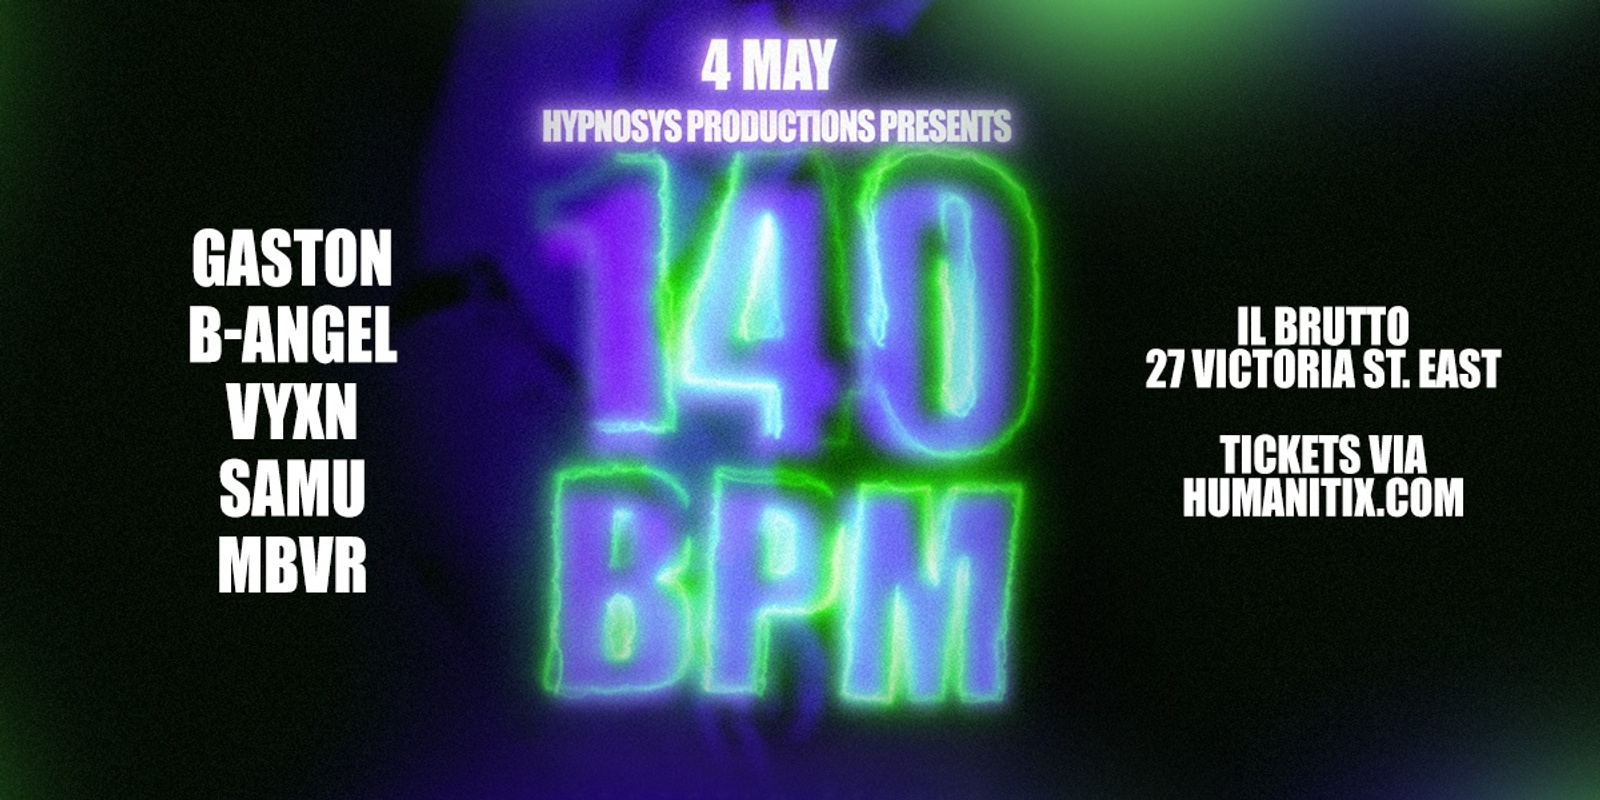 Banner image for HYPNOSIS productions  presents: 140 BPM Strictly Techno Event 